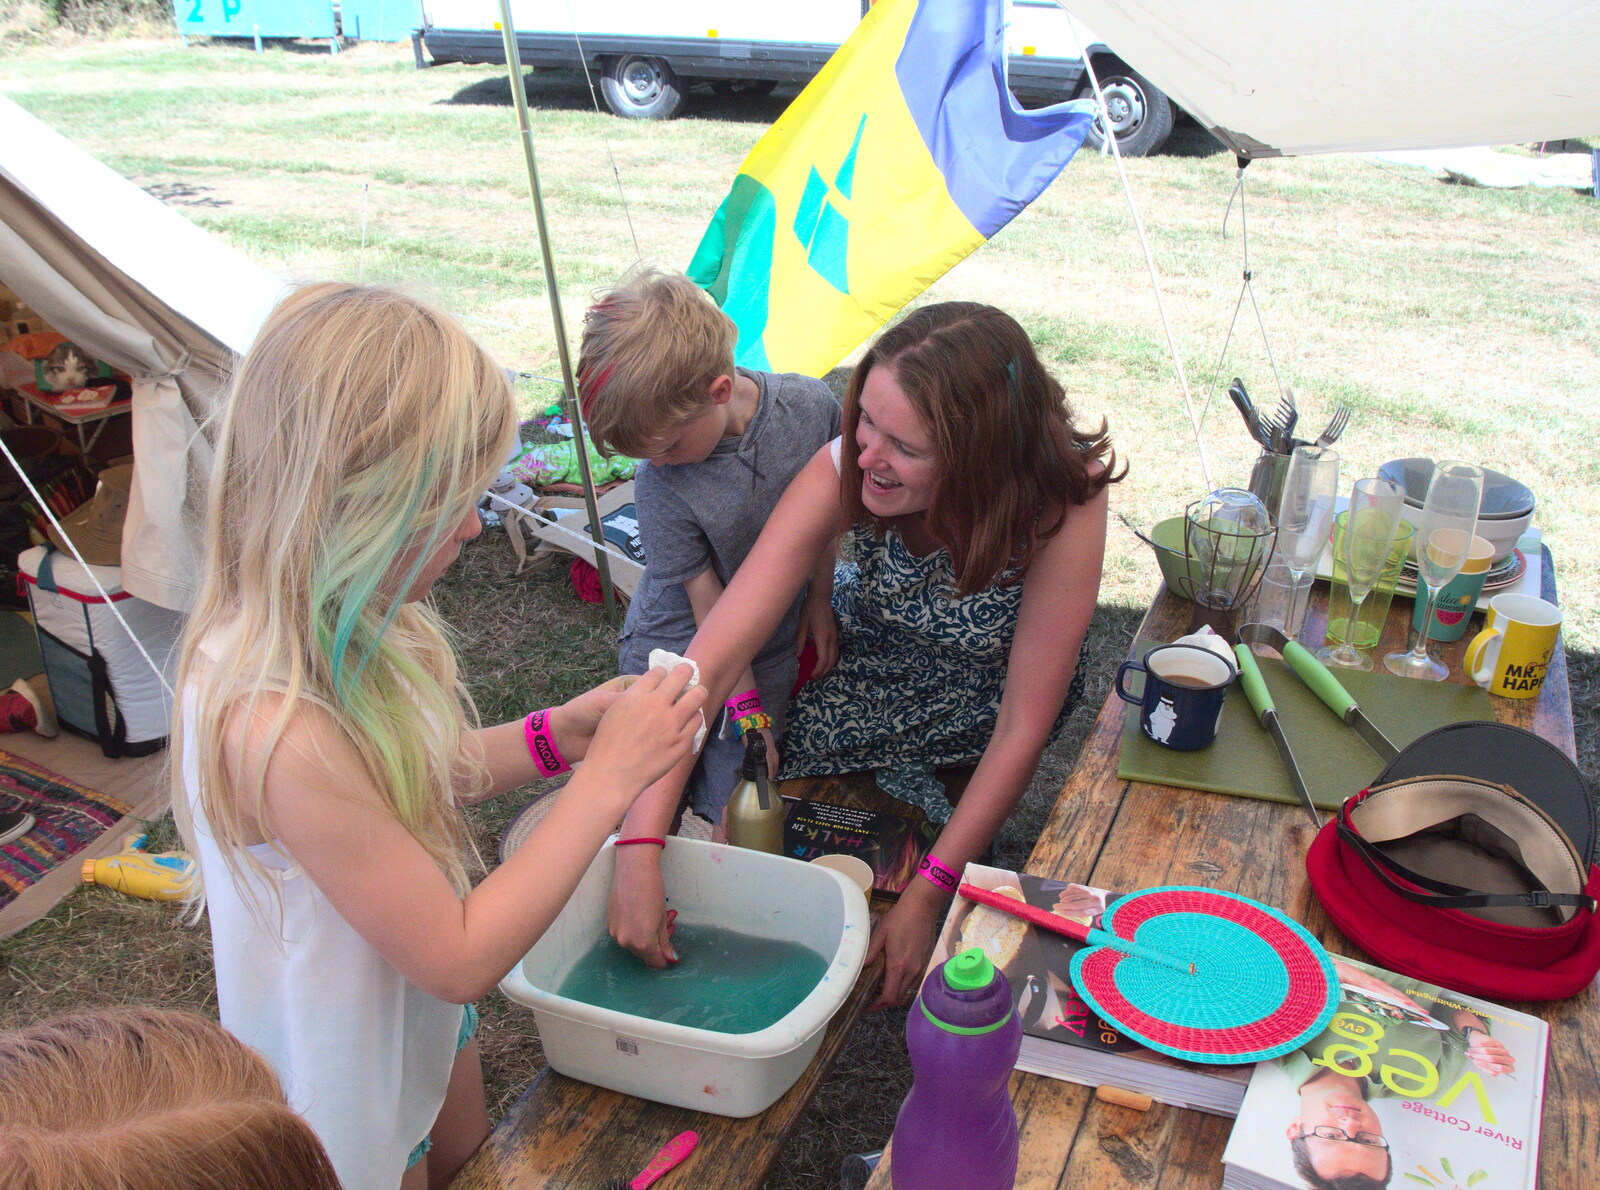 Isobel helps out with temporary tattoos from WoW Festival, Burston, Norfolk - 29th June - 1st July 2018